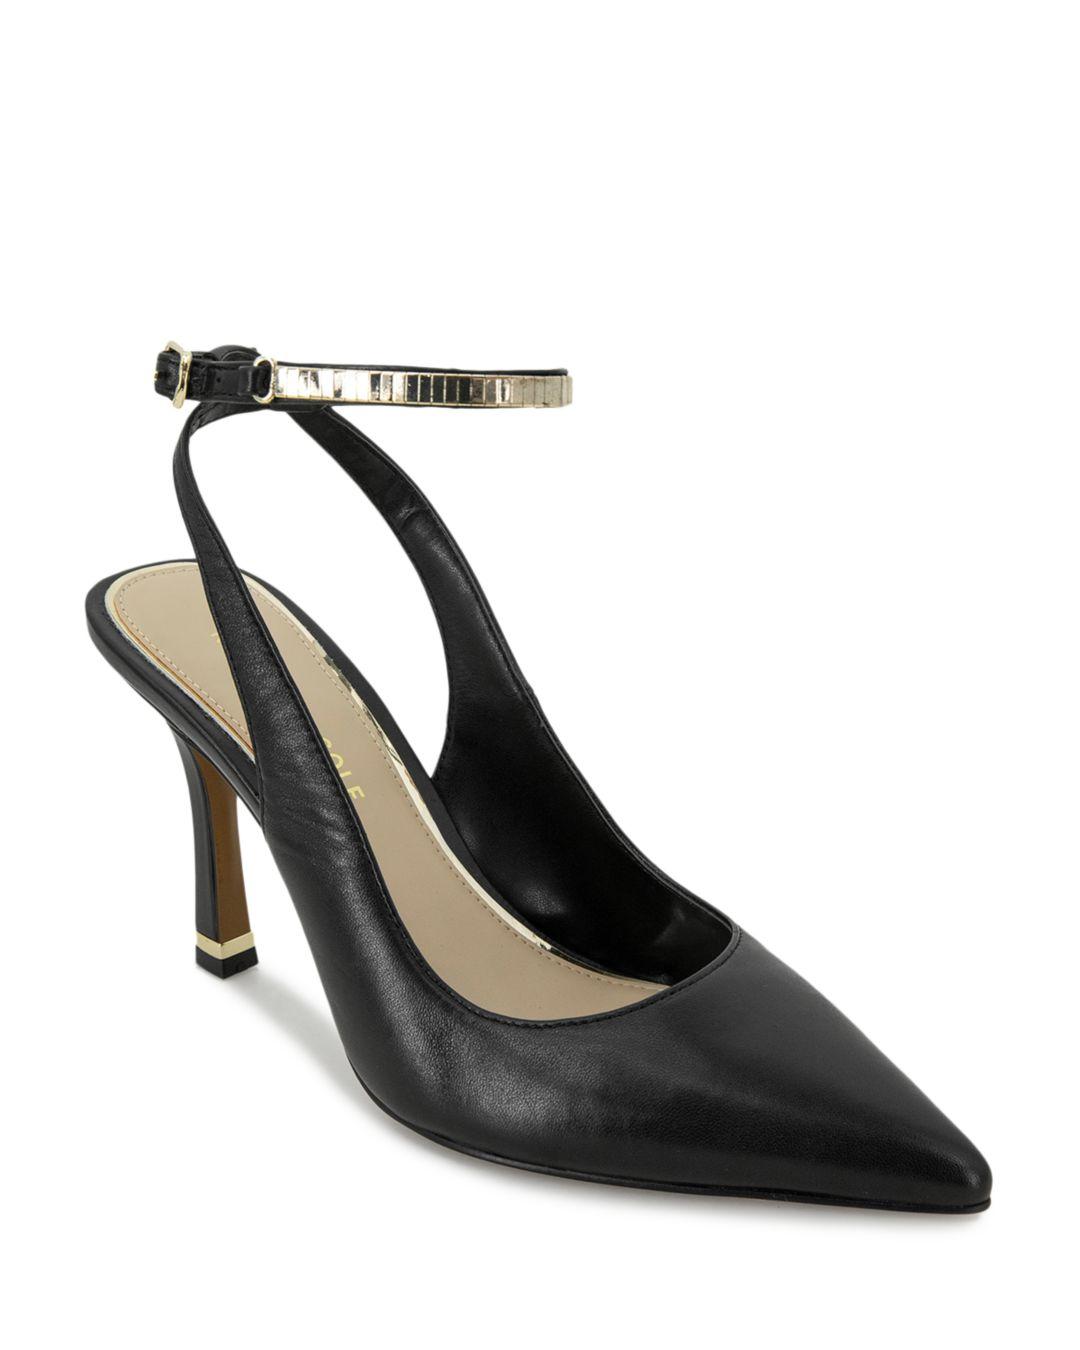 Kenneth Cole Romi Pointed Toe Chain Strap High Heel Pumps in Black | Lyst